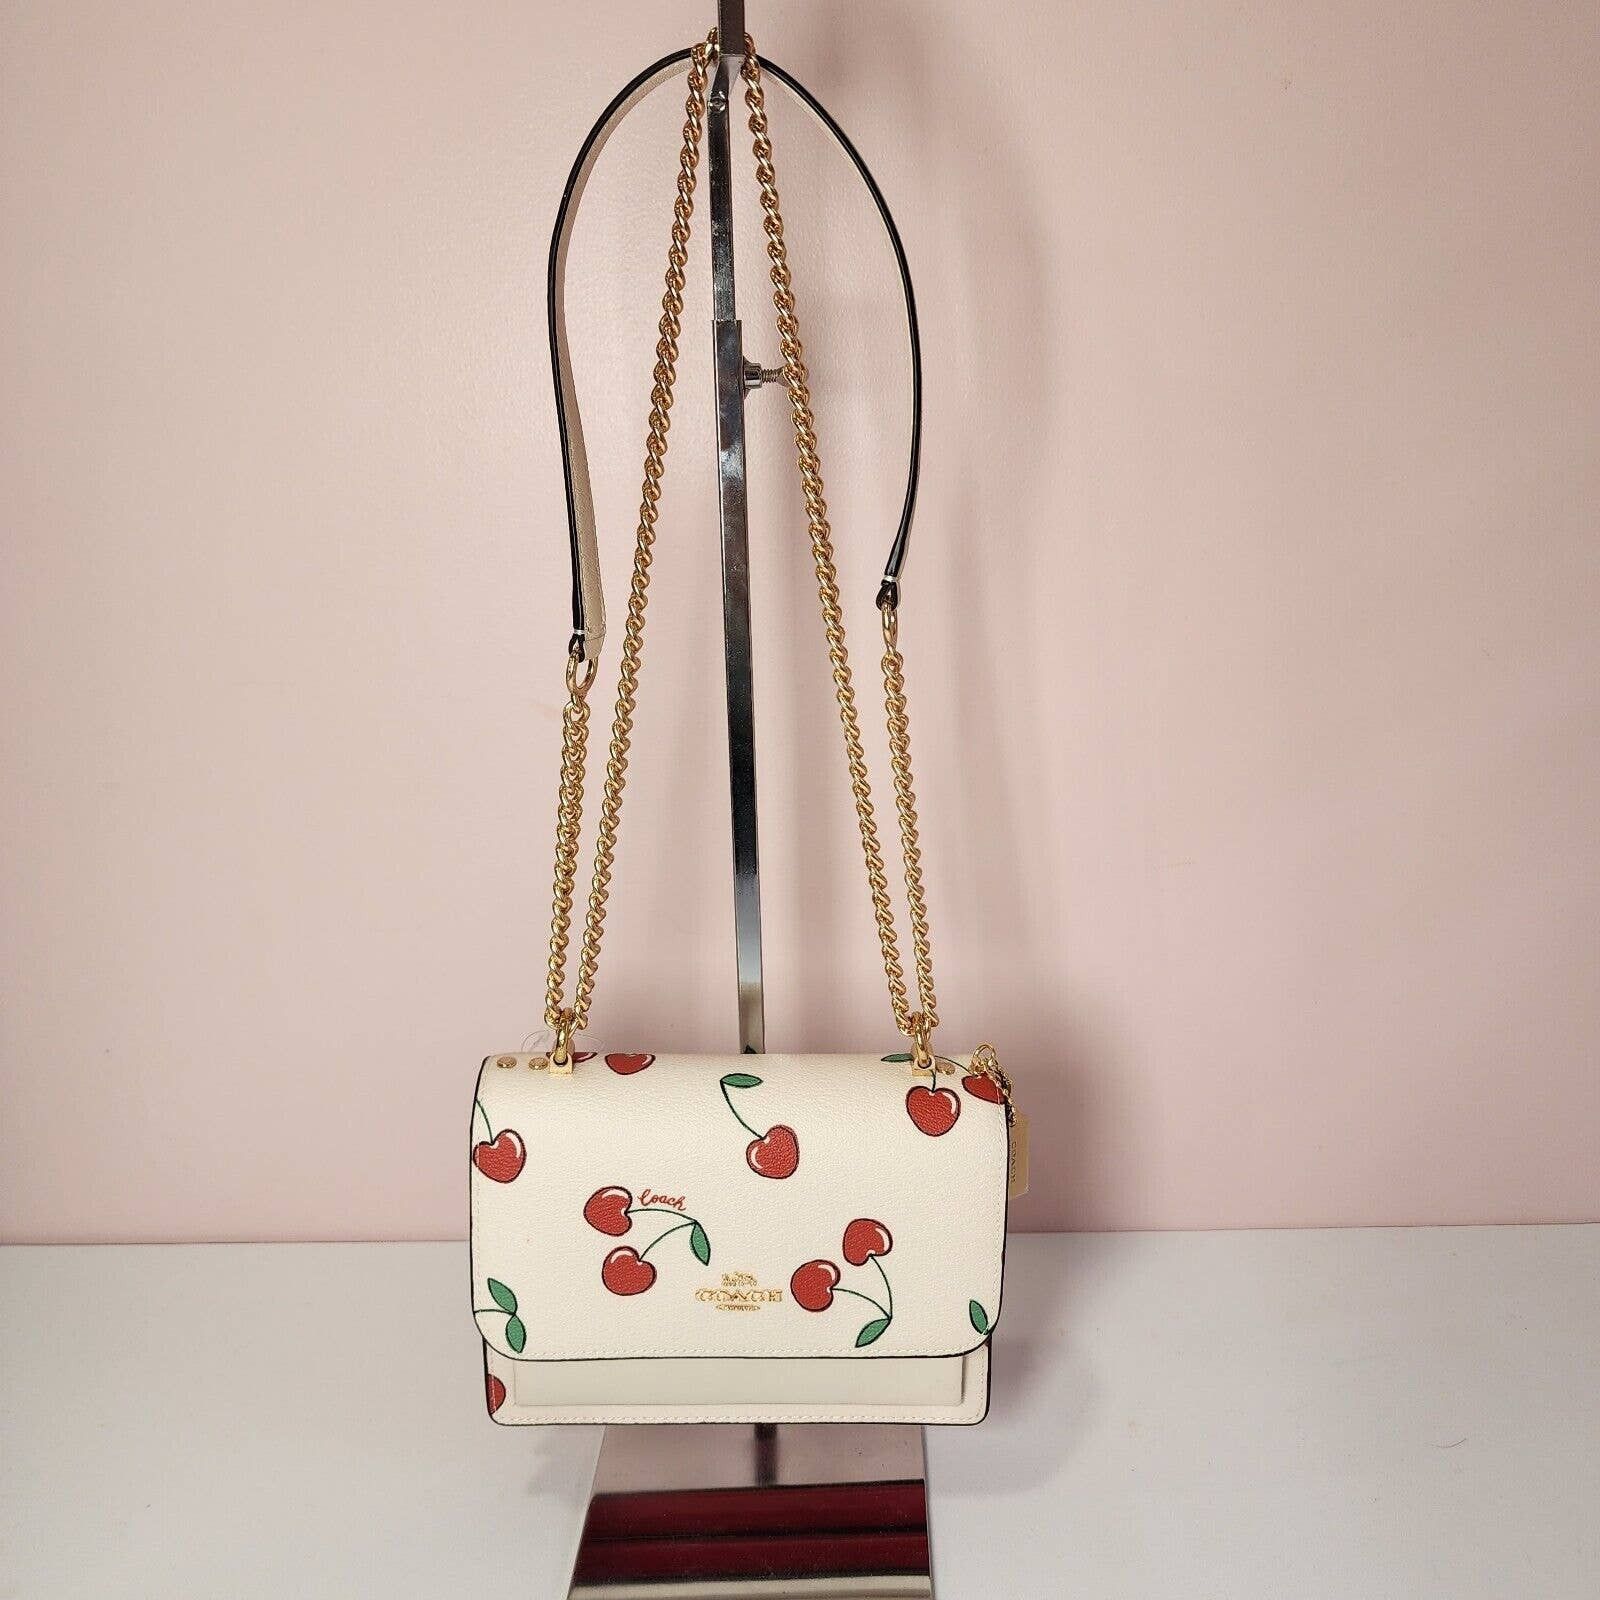 NWT Coach Mini Rowan File Bag In Signature Canvas With Floral Cluster Print